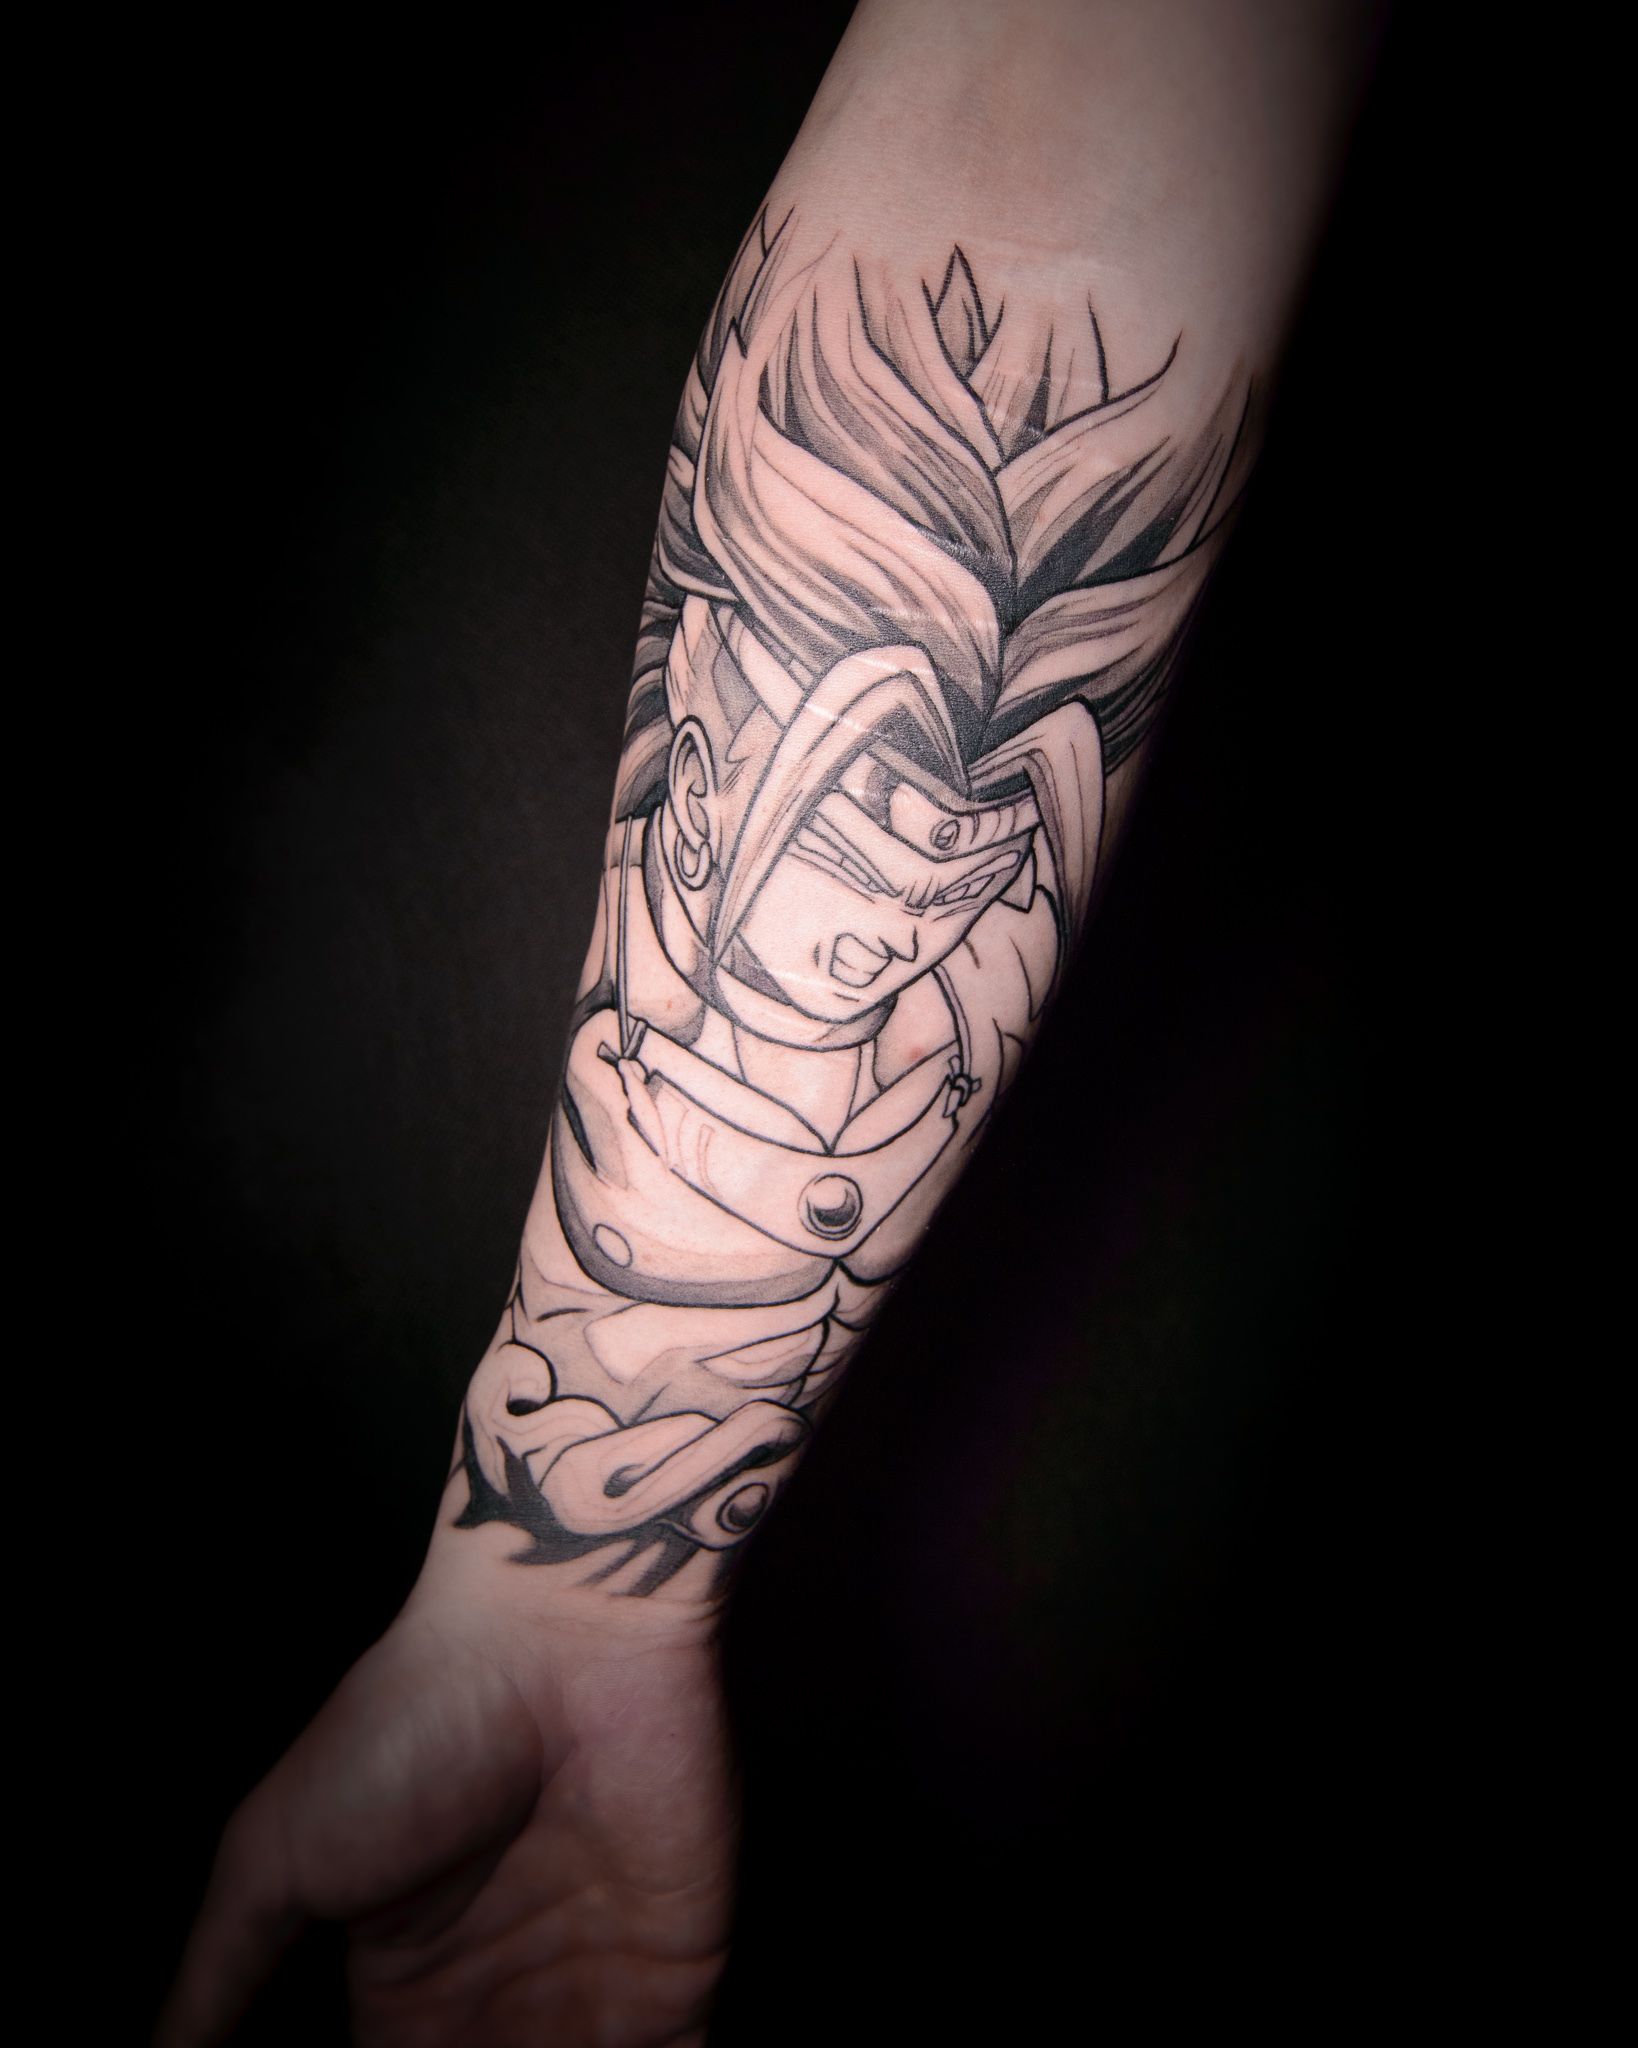 Lines N Shades Tattoo Studio on Instagram Our client came up with an  amusing idea for a tattoo She wanted tree of  Tattoos Tattoo shading  Tree of life tattoo